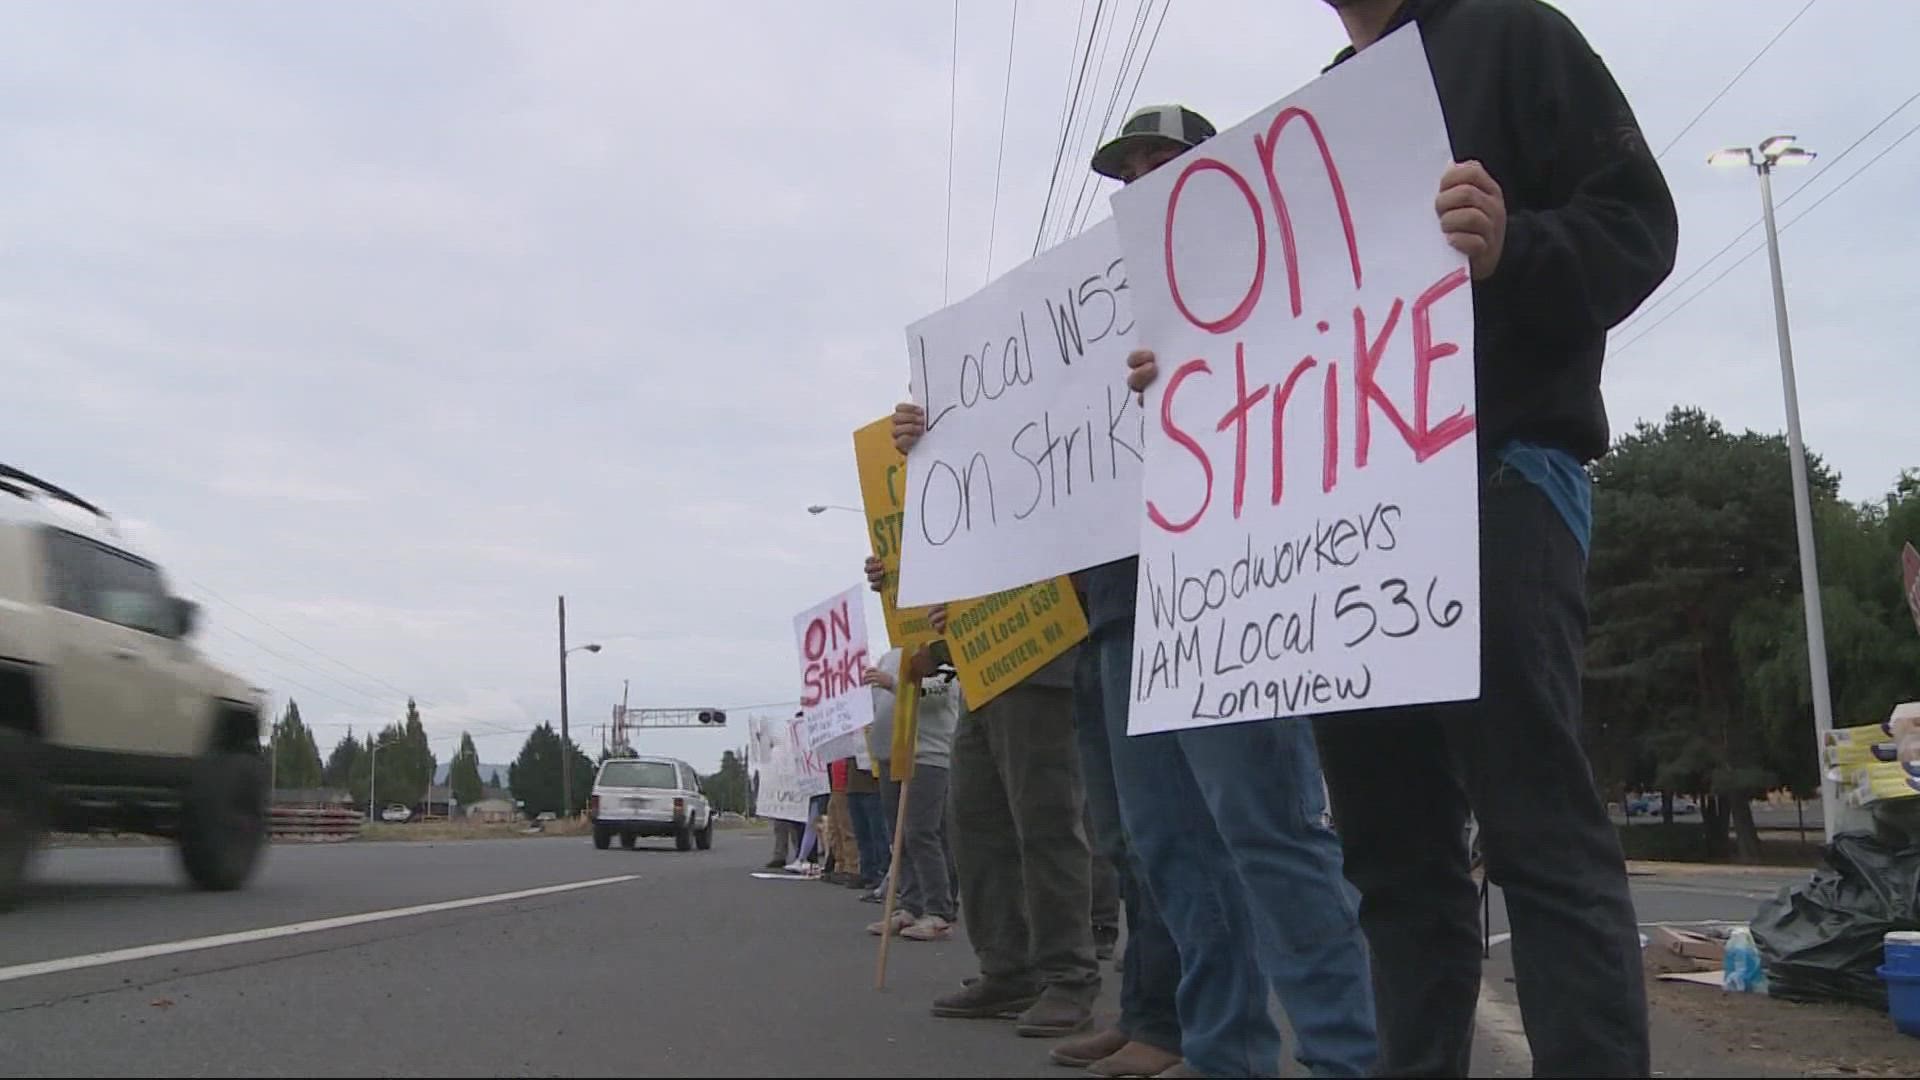 Weyerhaeuser employees in Oregon and Washington have been working at a new bargaining agreement because of low wage increase and healthcare premiums.